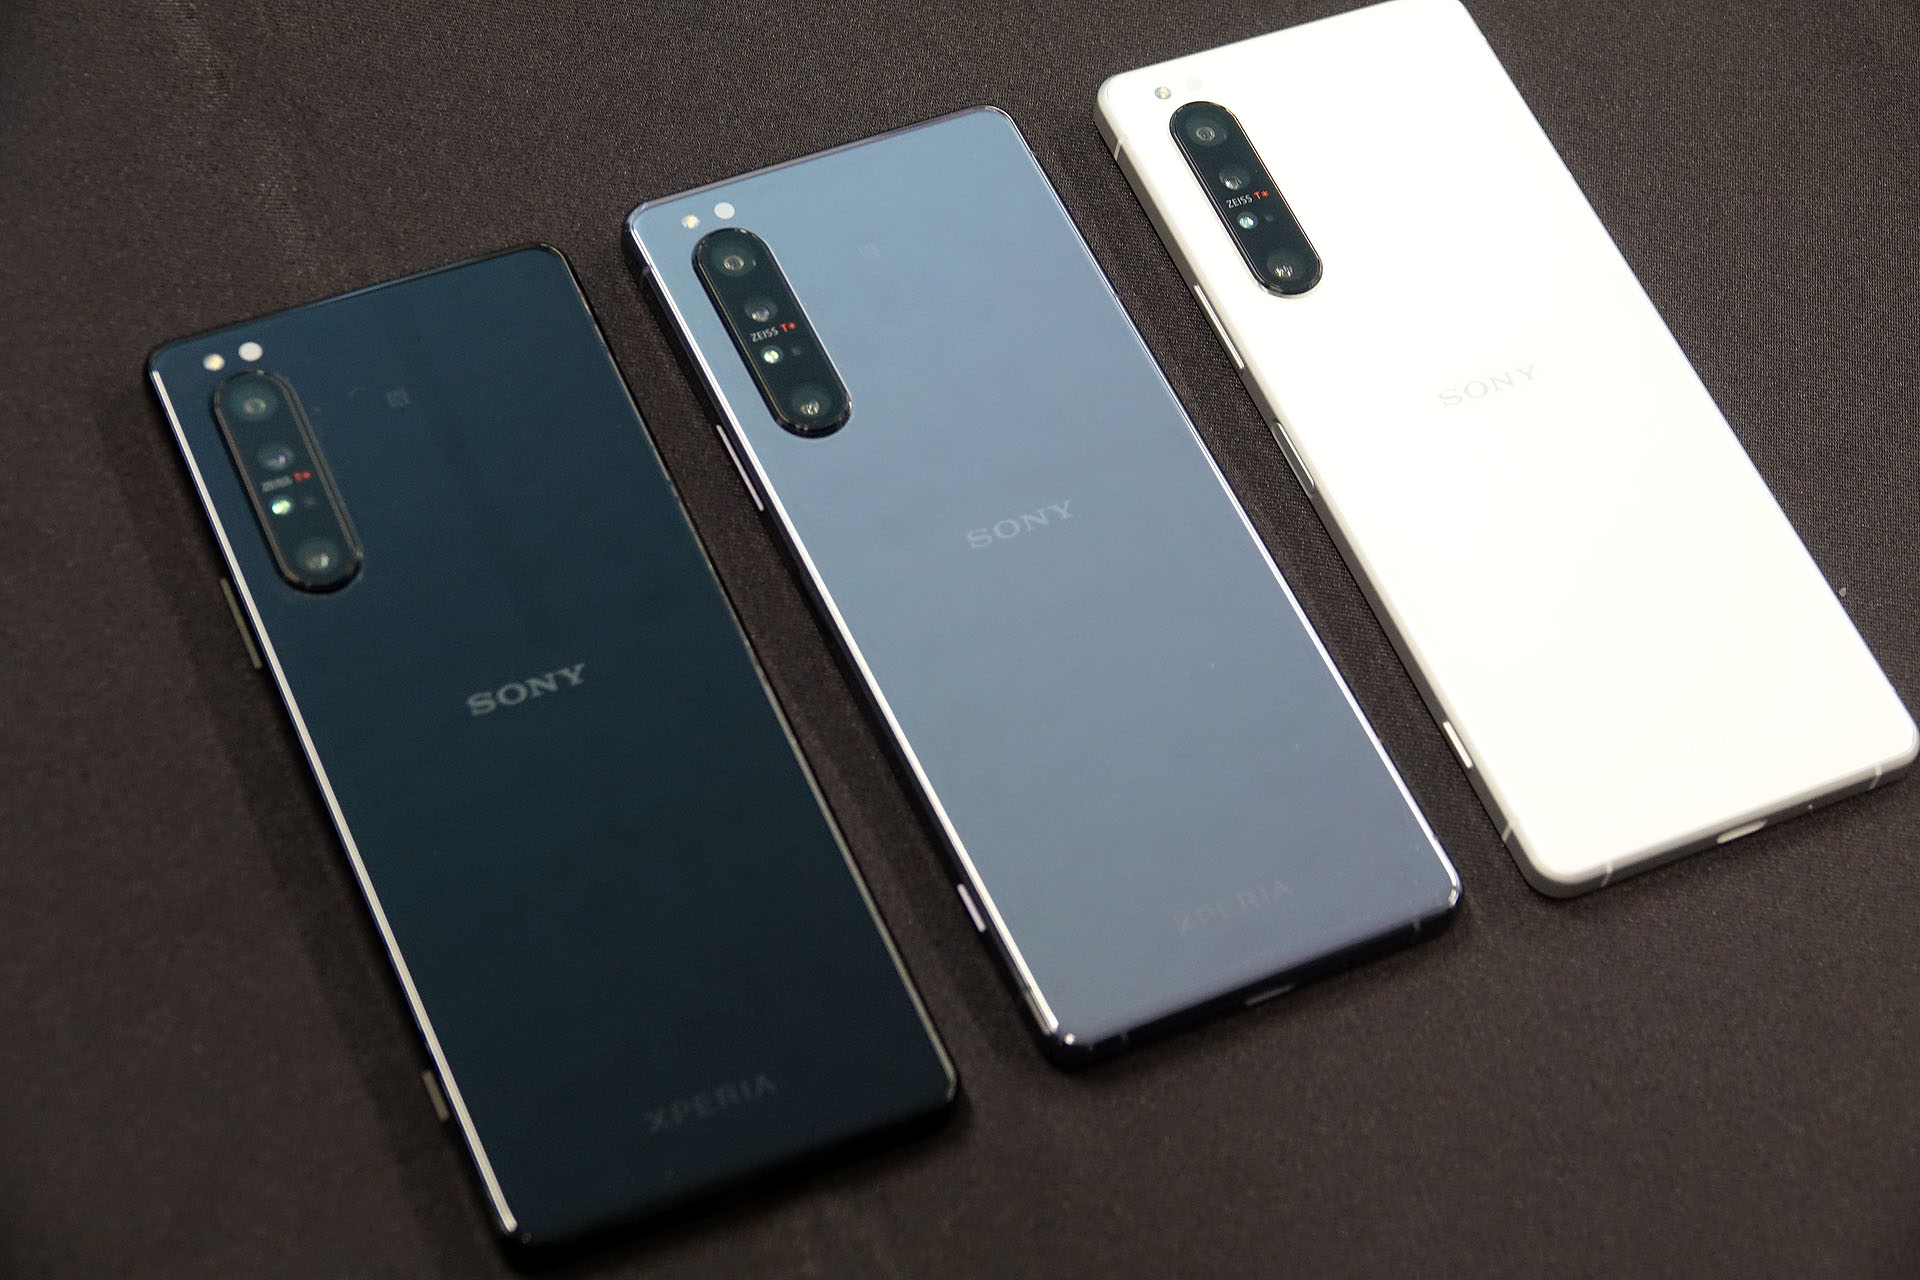 Xperia 1 ii au | Sony Xperia 1 II Price in India, Specifications